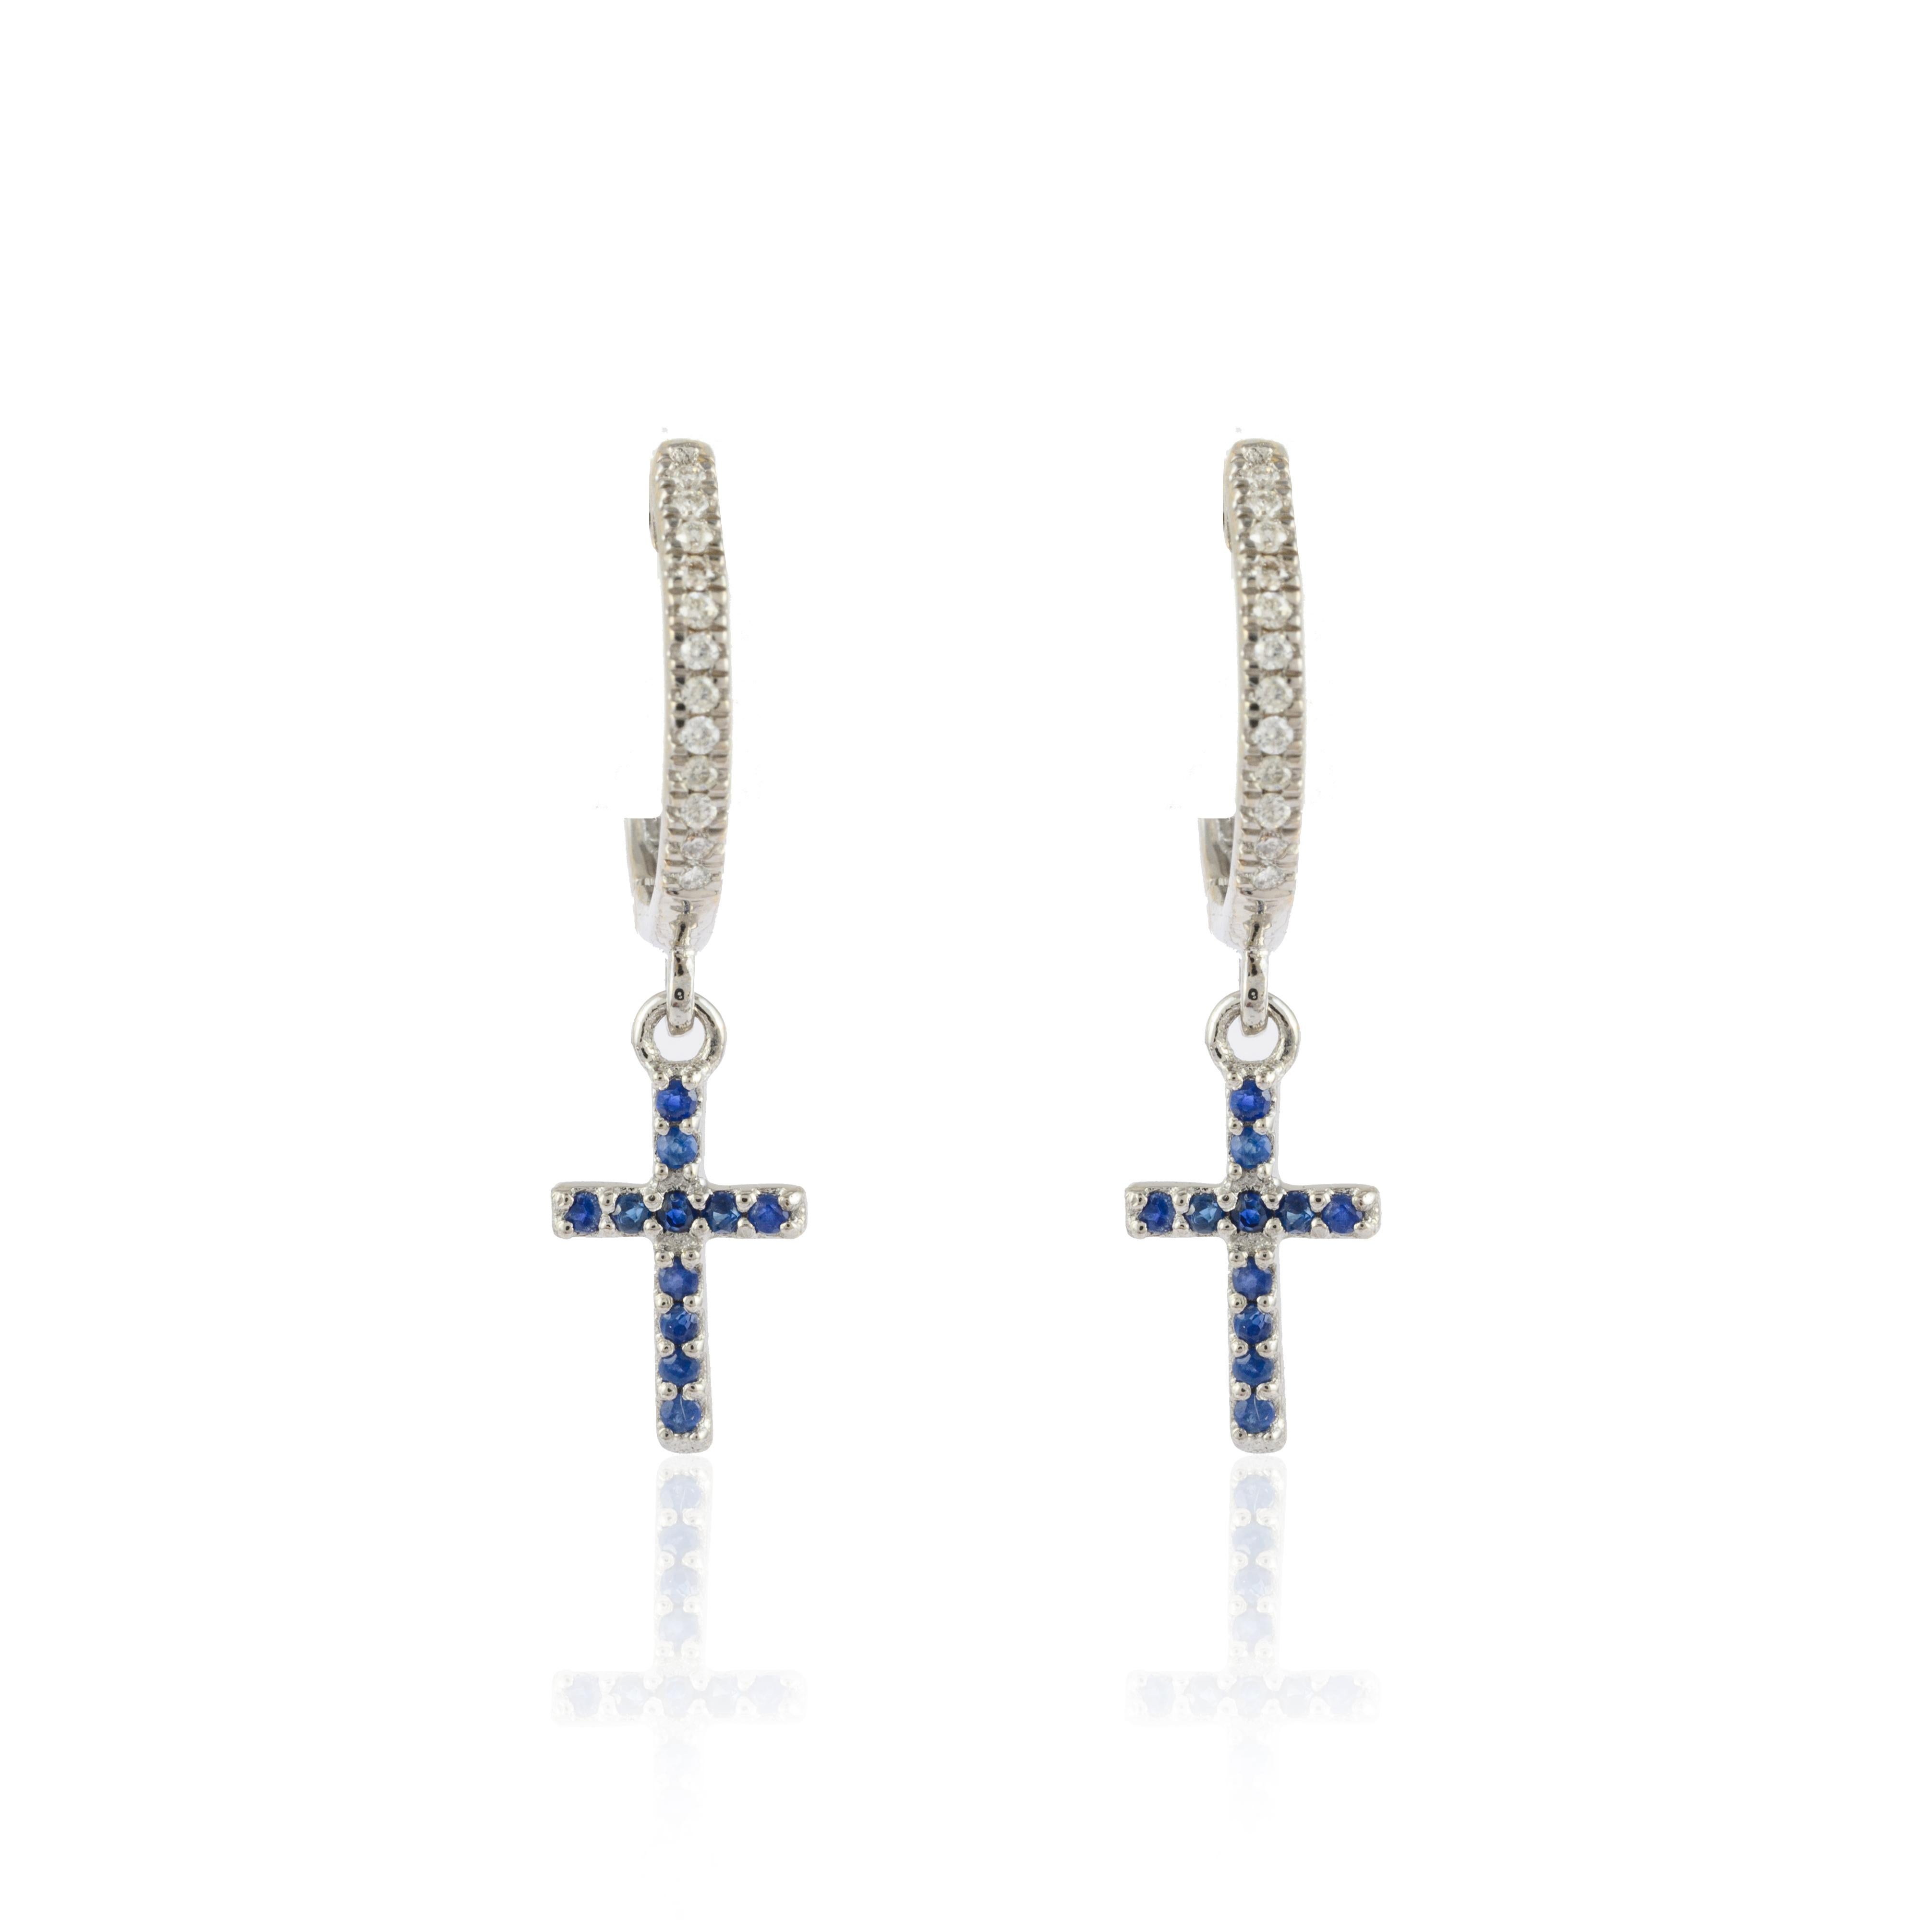 Diamond and Blue Sapphire Cross Hoop Earrings in 18K Gold to make a statement with your look. You shall need small huggie earrings to make a statement with your look. These earrings create a sparkling, luxurious look featuring round cut